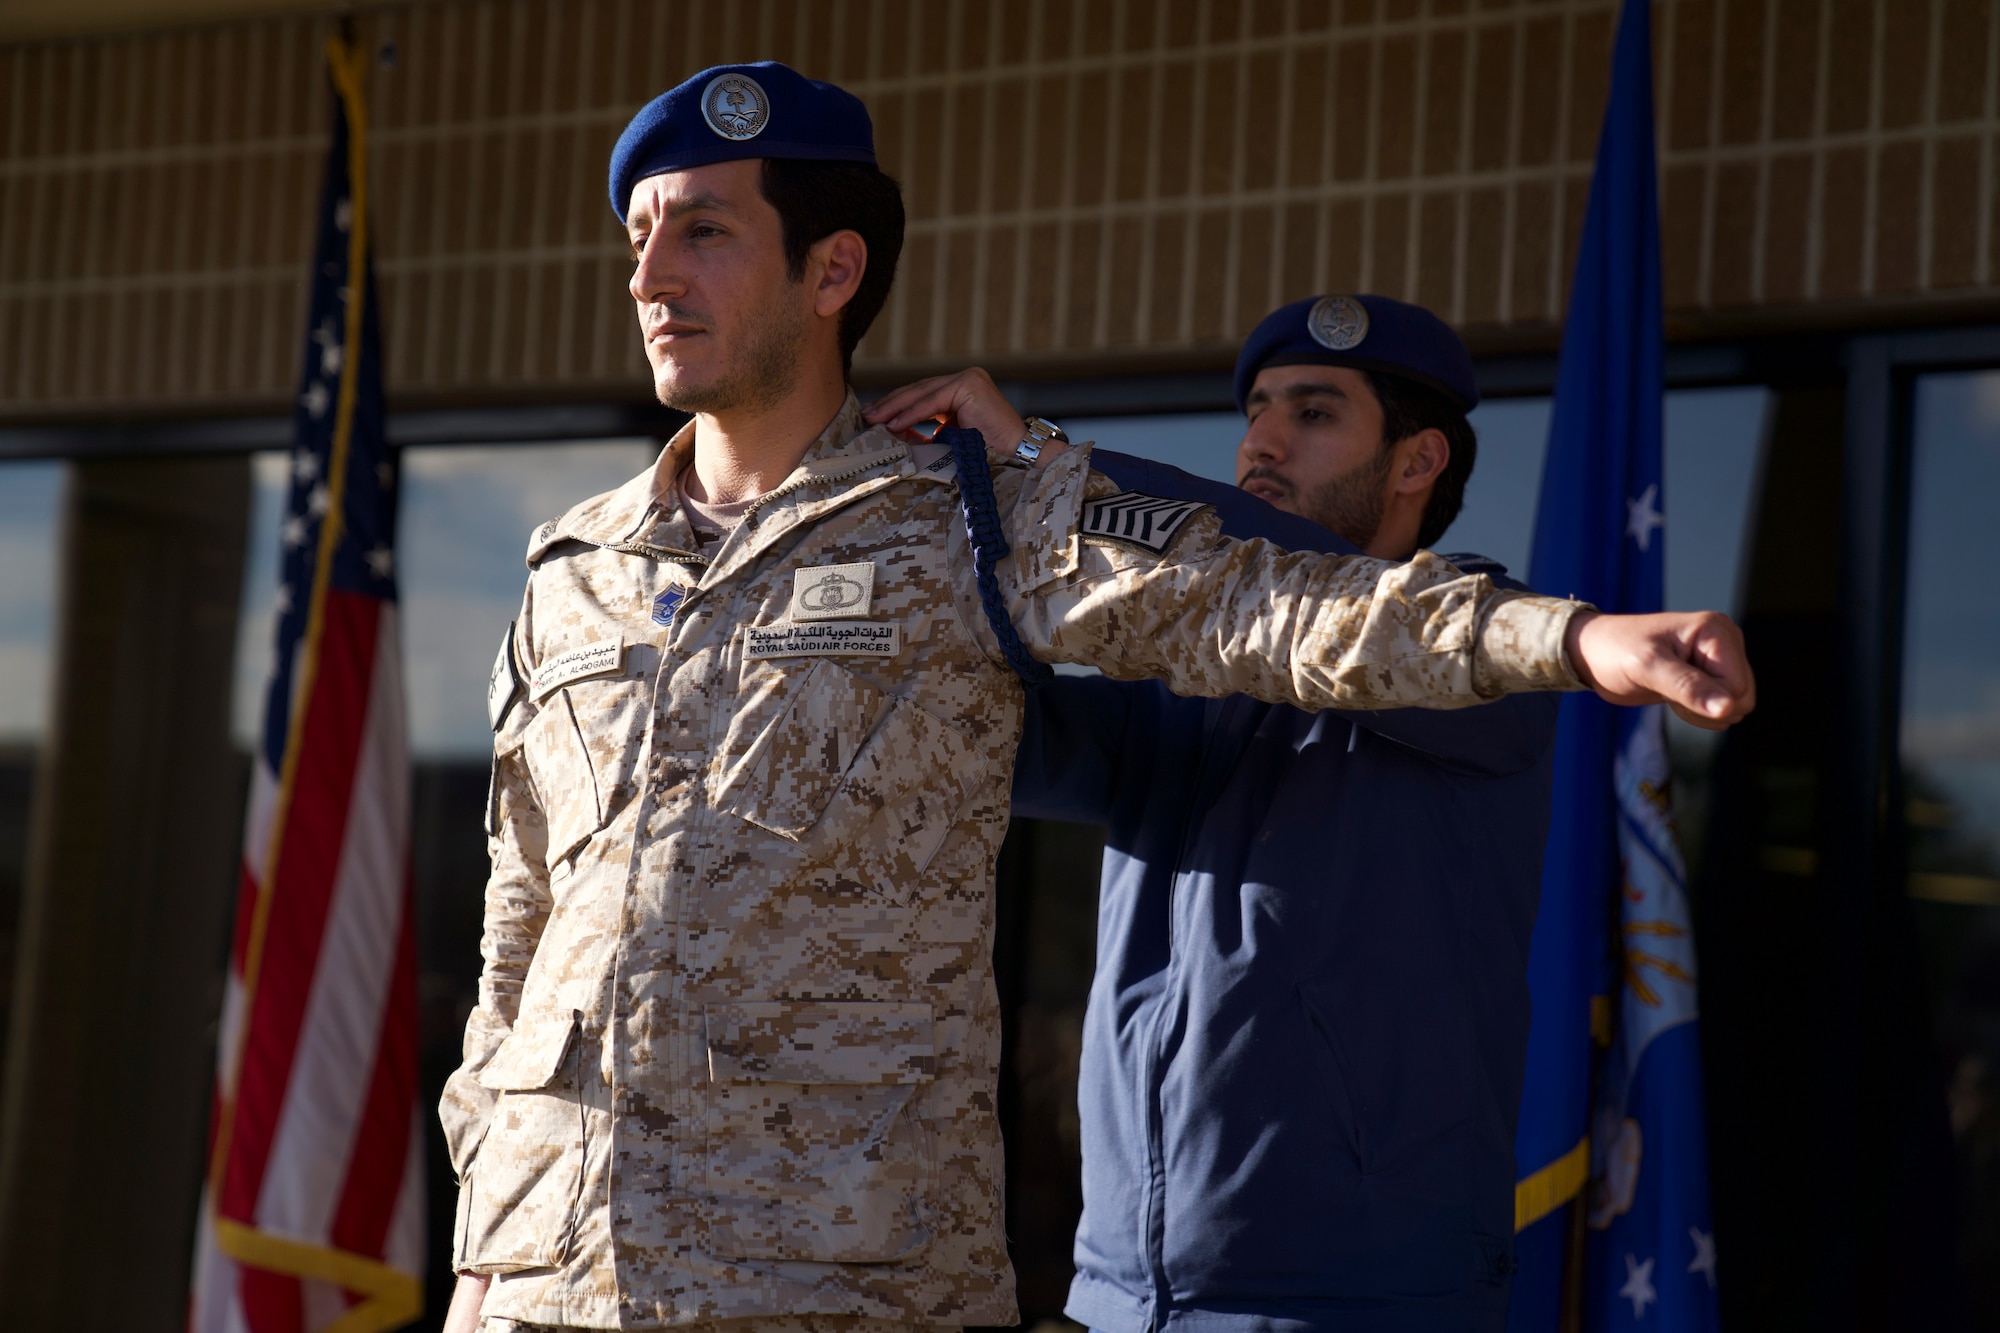 Royal Saudi air force Senior Master Sgt. Obaid Al-Bogami, 81st Training Support Squadron Military Training Leader course student, recieves a blue rope during the MTL course graduation ceremony outside the Levitow Training Support Facility at Keesler Air Force Base, Mississippi, March 5, 2020. Al-Bogami was the first international student the MTL schoolhouse graduated in approximately three years. (U.S. Air Force photo by Airman 1st Class Spencer Tobler)